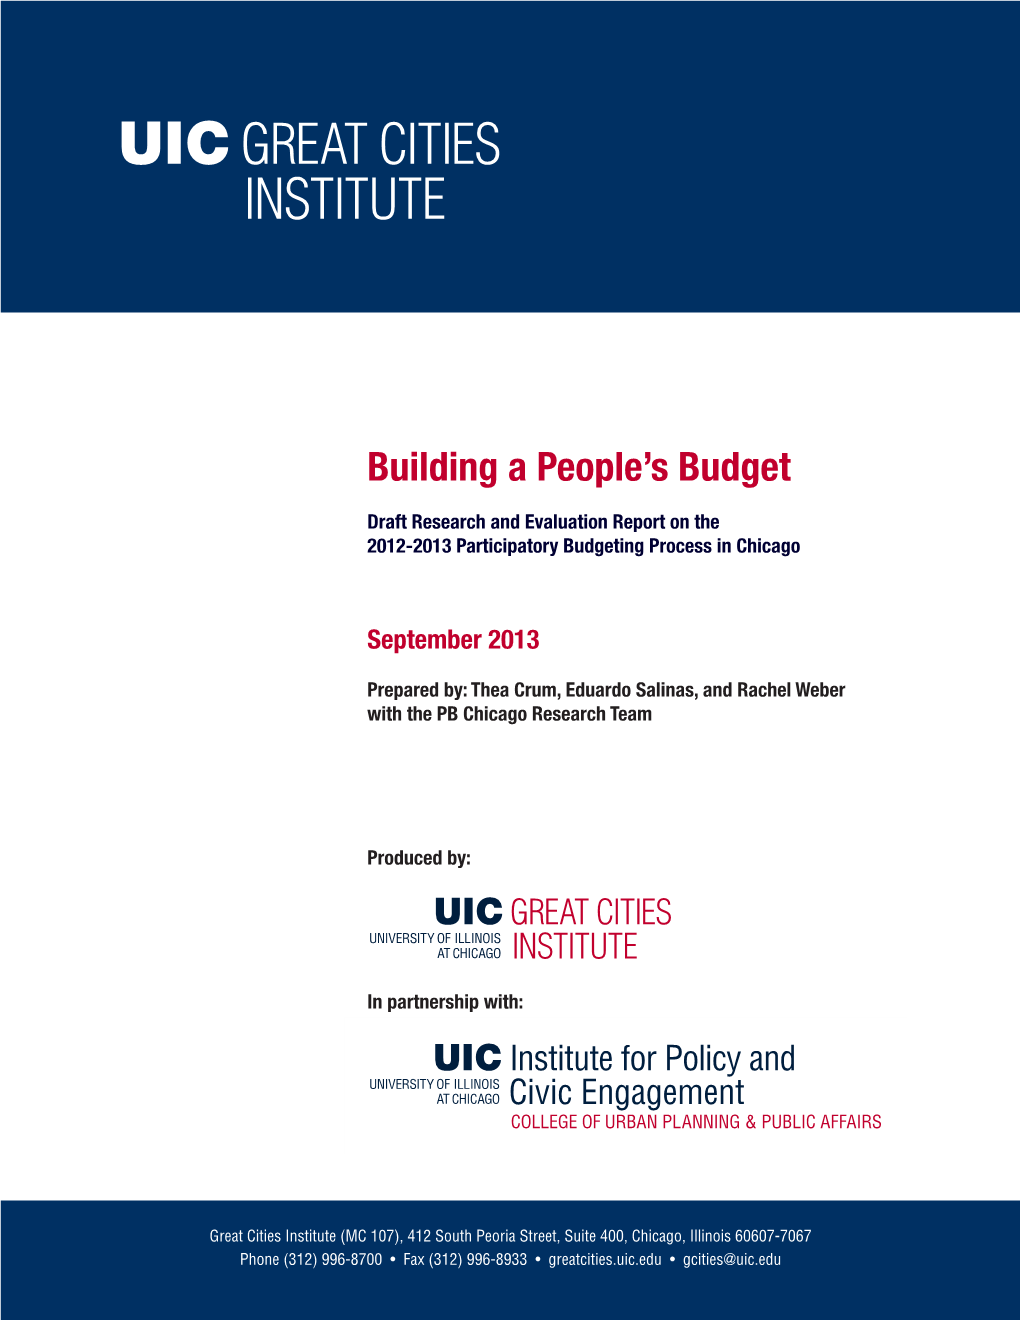 Building a People's Budget